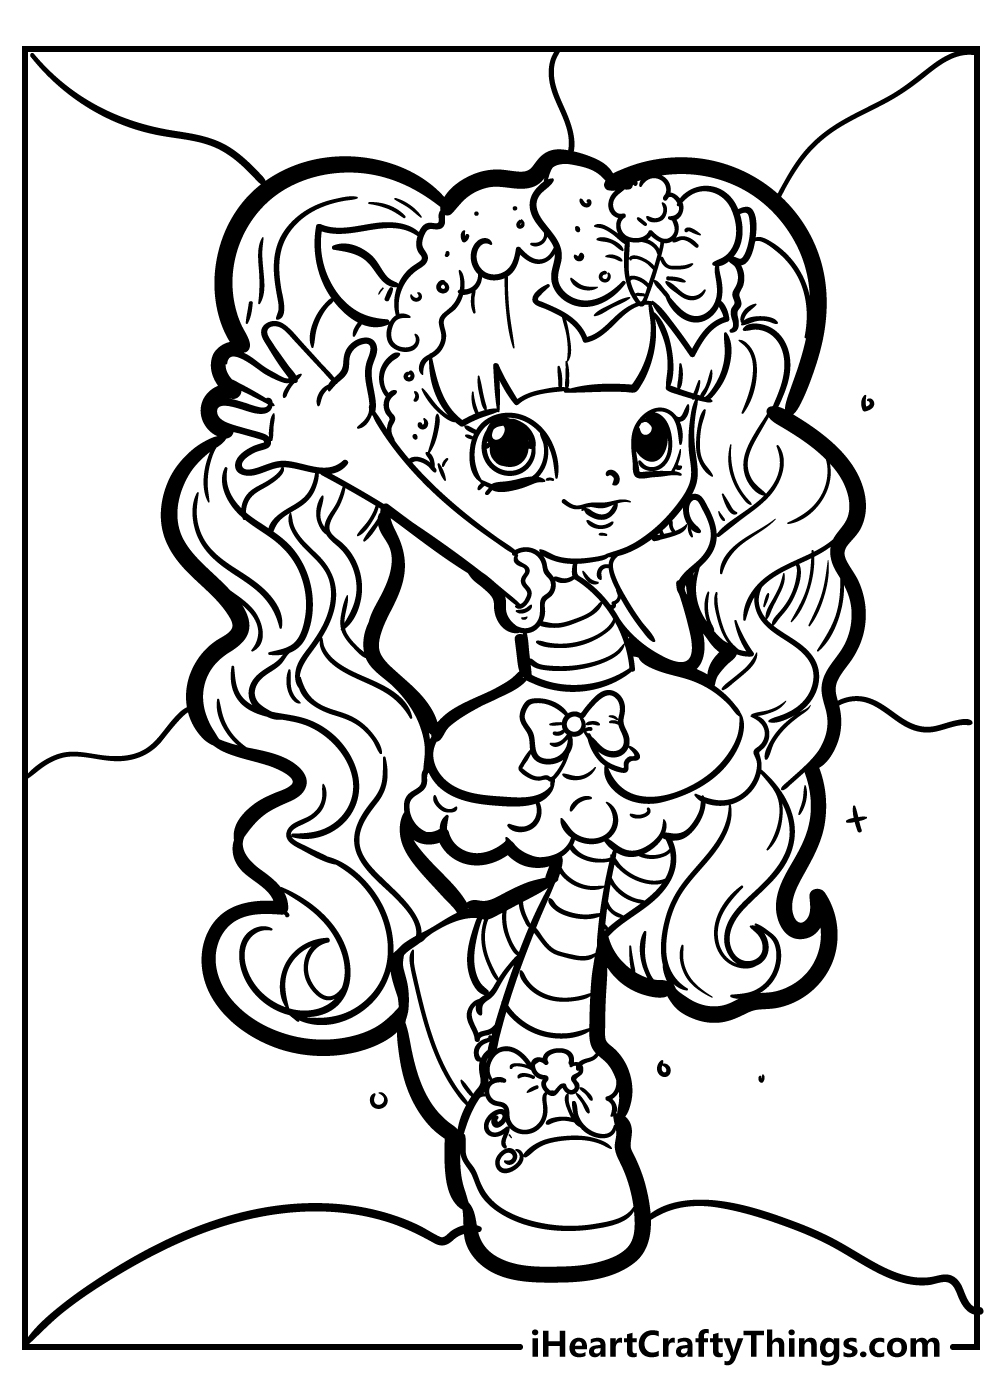 candy sweets shopkins coloring pages download now